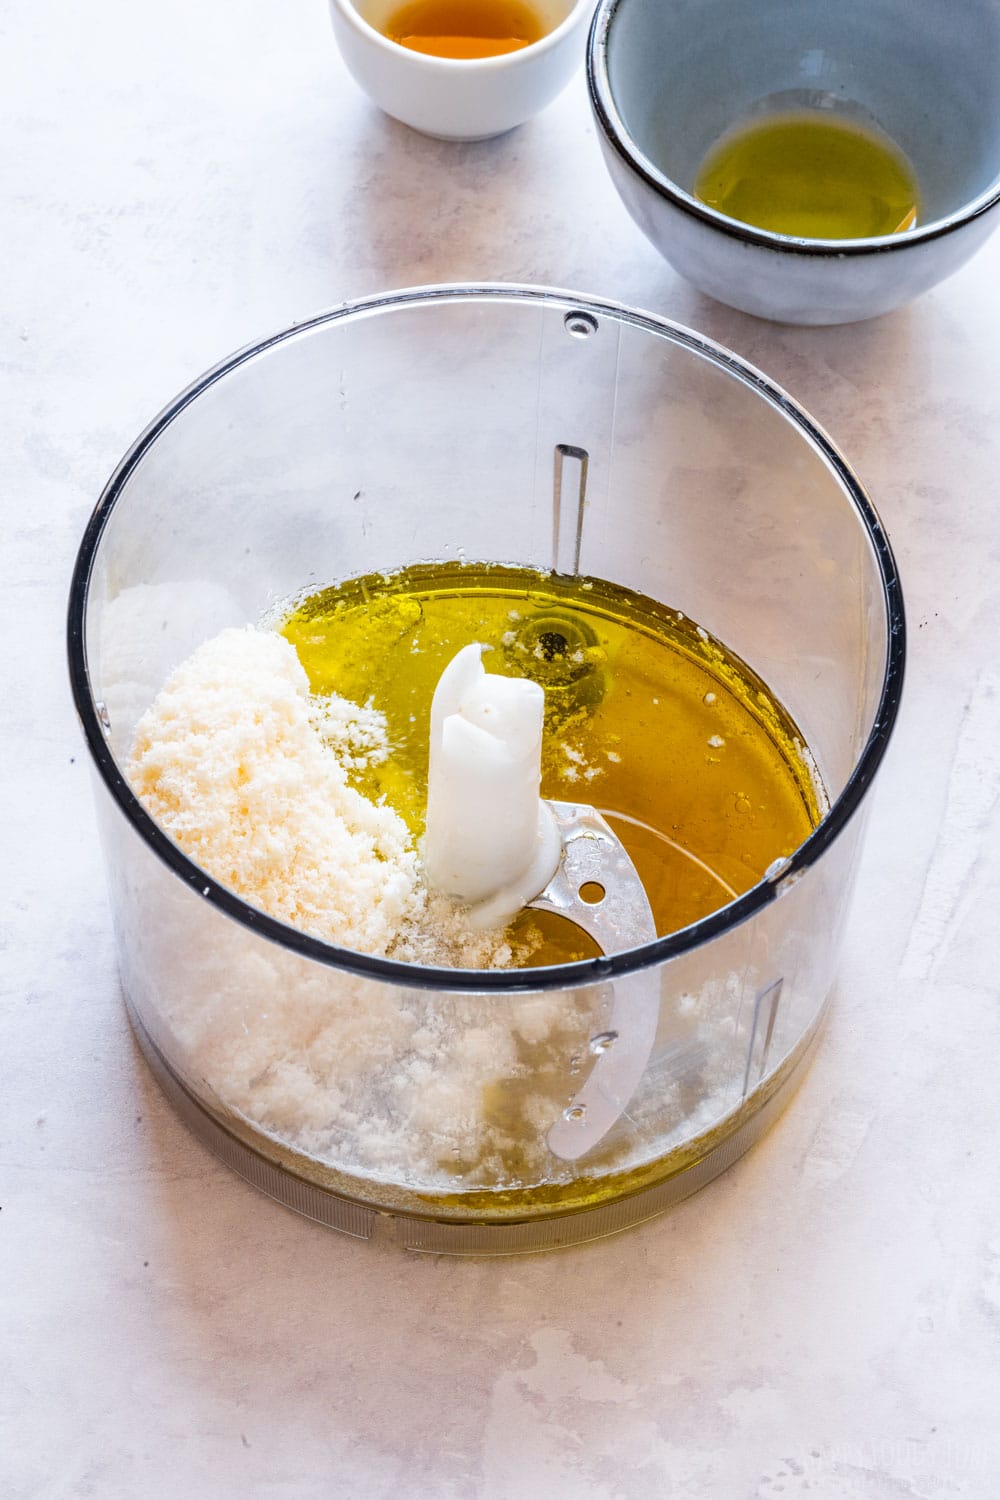 Parmesan, olive oil, honey and vinegar in the blender container.